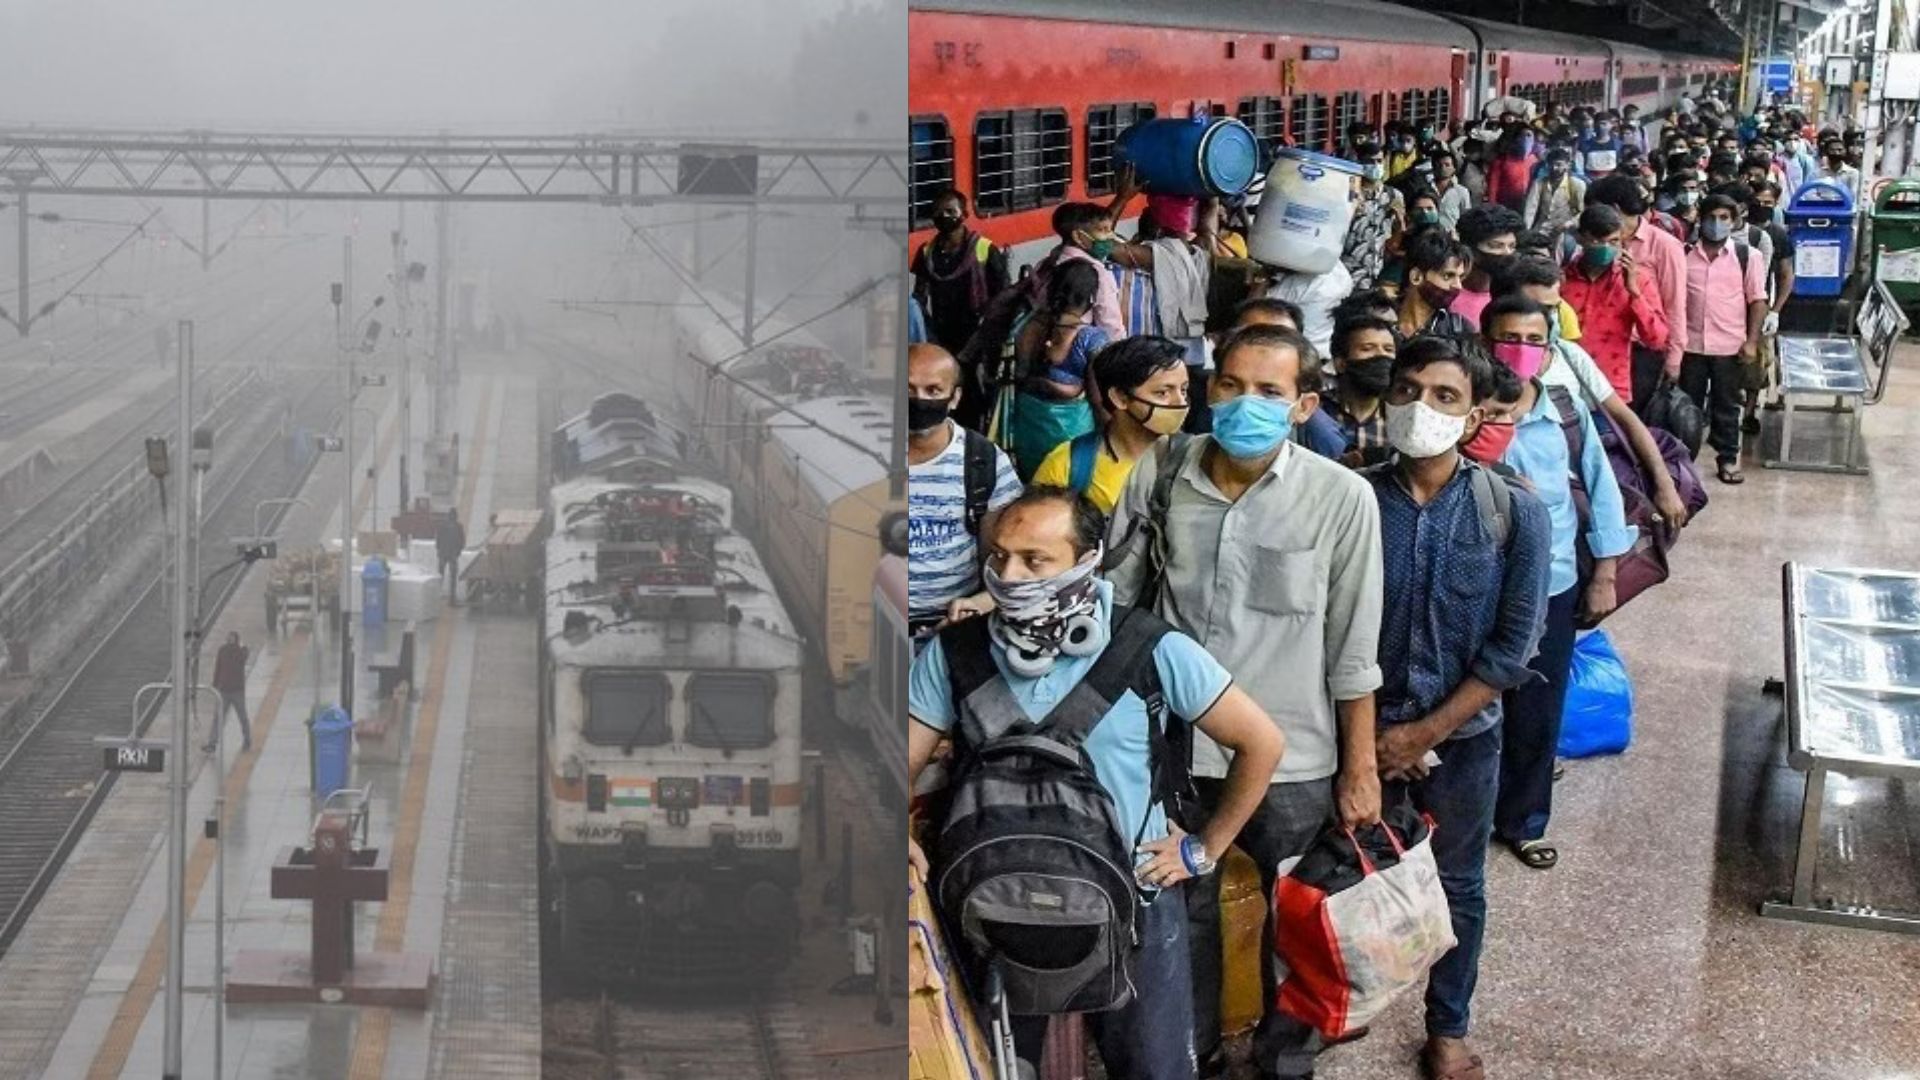 Fog Disrupts Train Schedules in Delhi: 20 Trains Delayed, Travellers Face Hassle